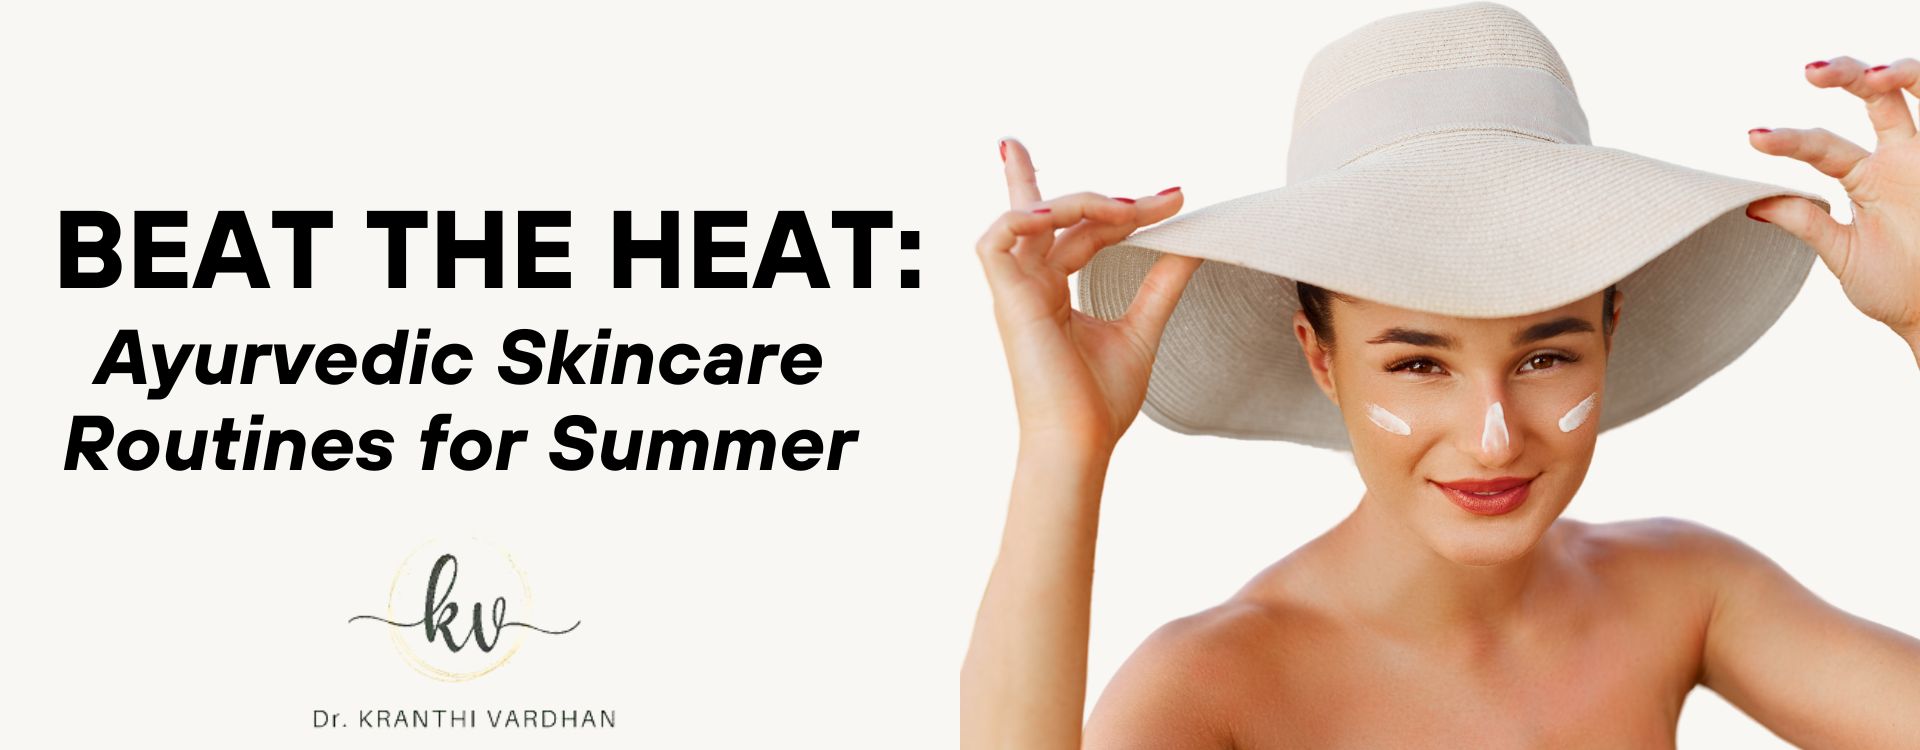 Beat the Heat: Ayurvedic Skincare Routines for Summer